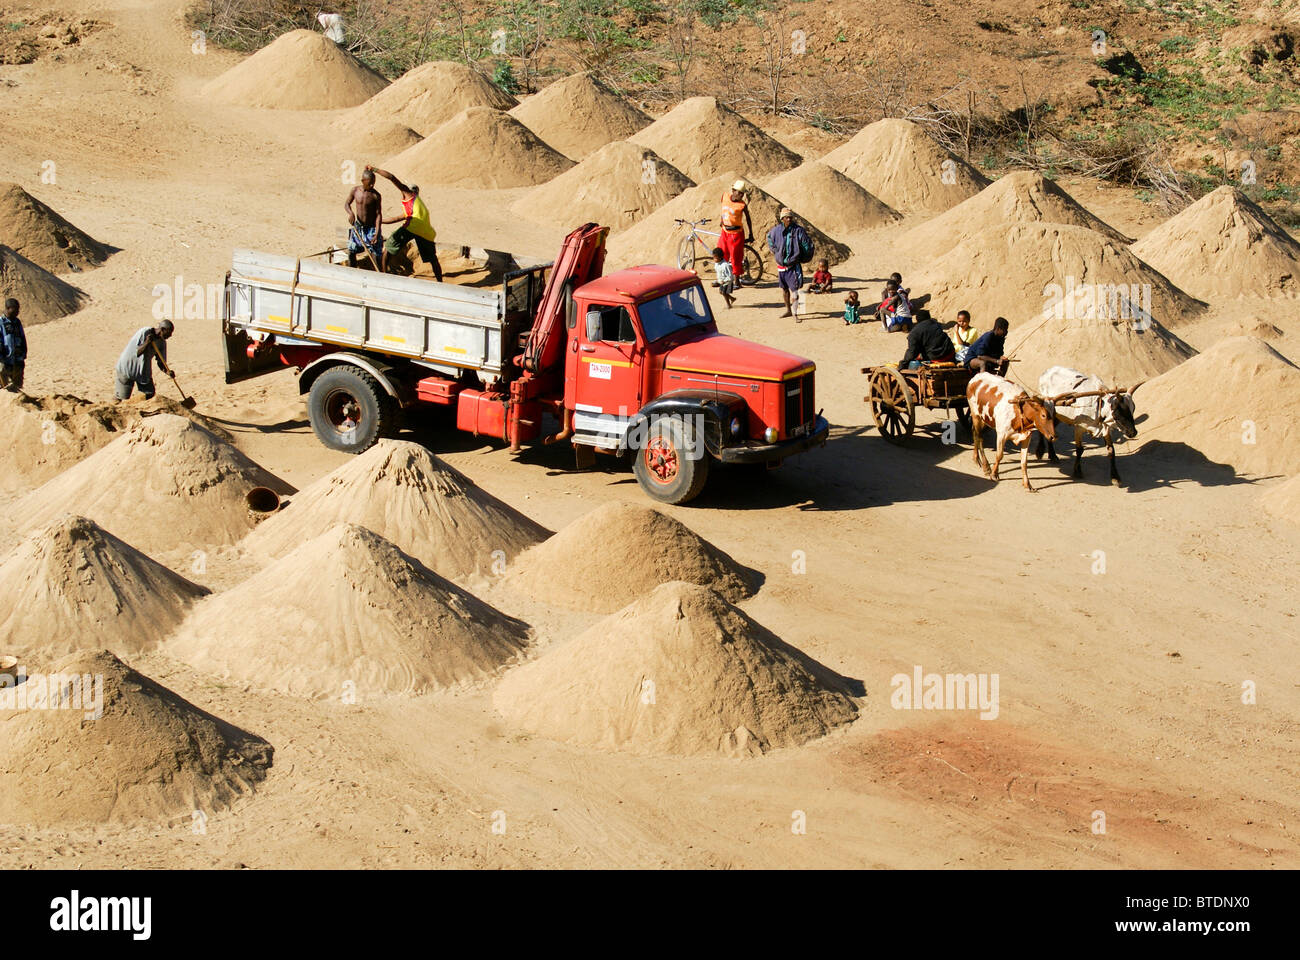 Madagascar, Anosy region, near Tolagnaro (Fort Dauphin) Collecting sand from the dunes Stock Photo